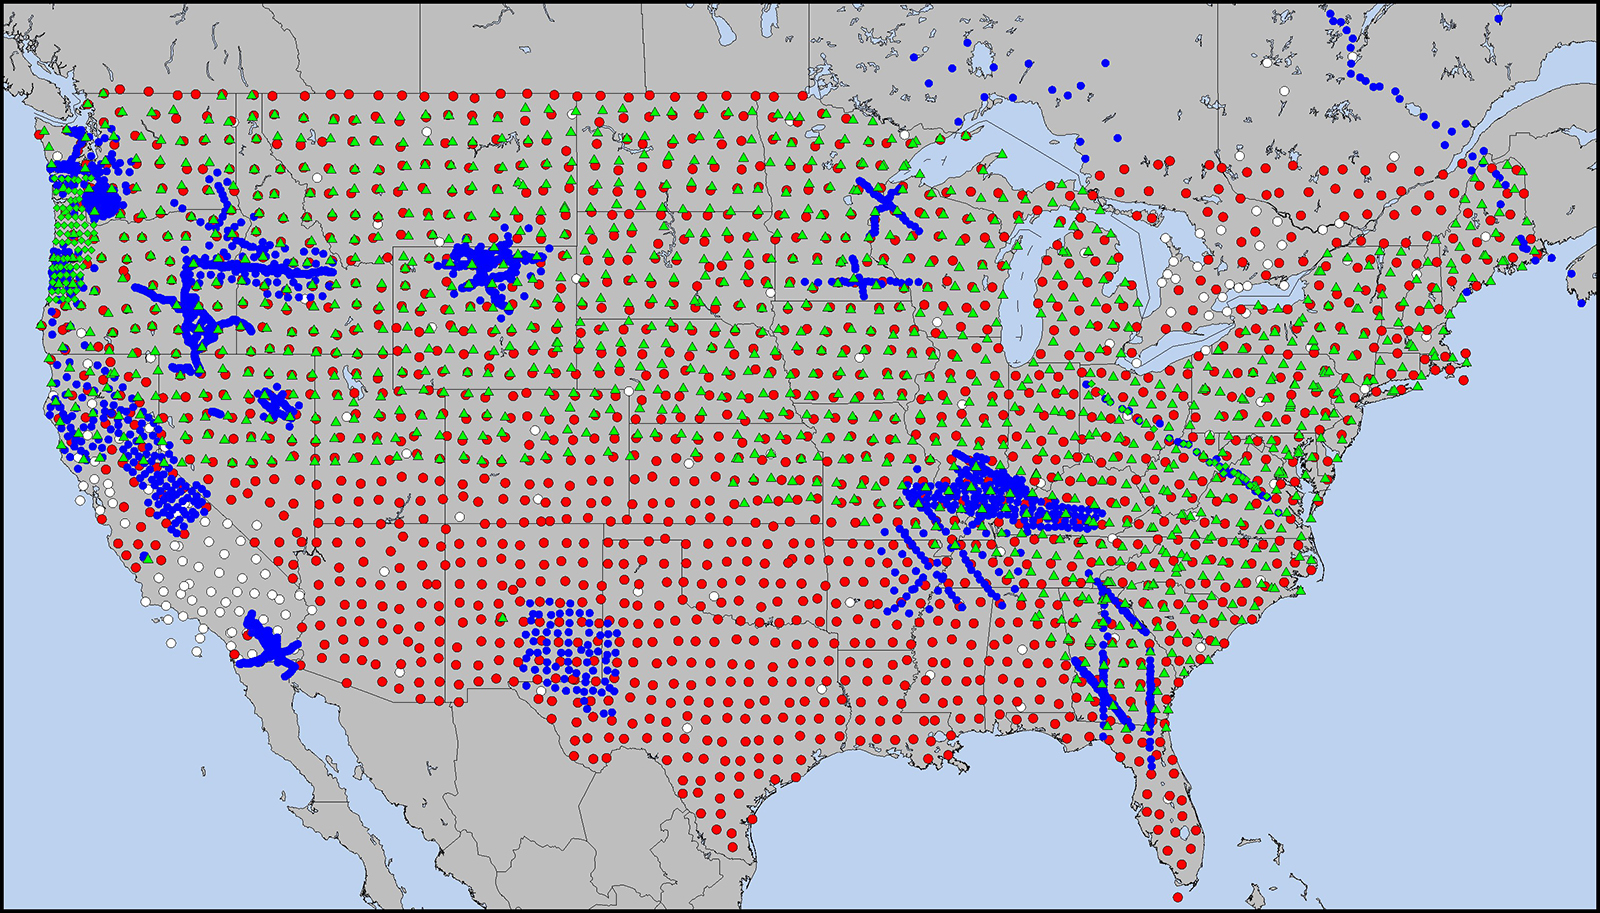 USArray in the Lower 48